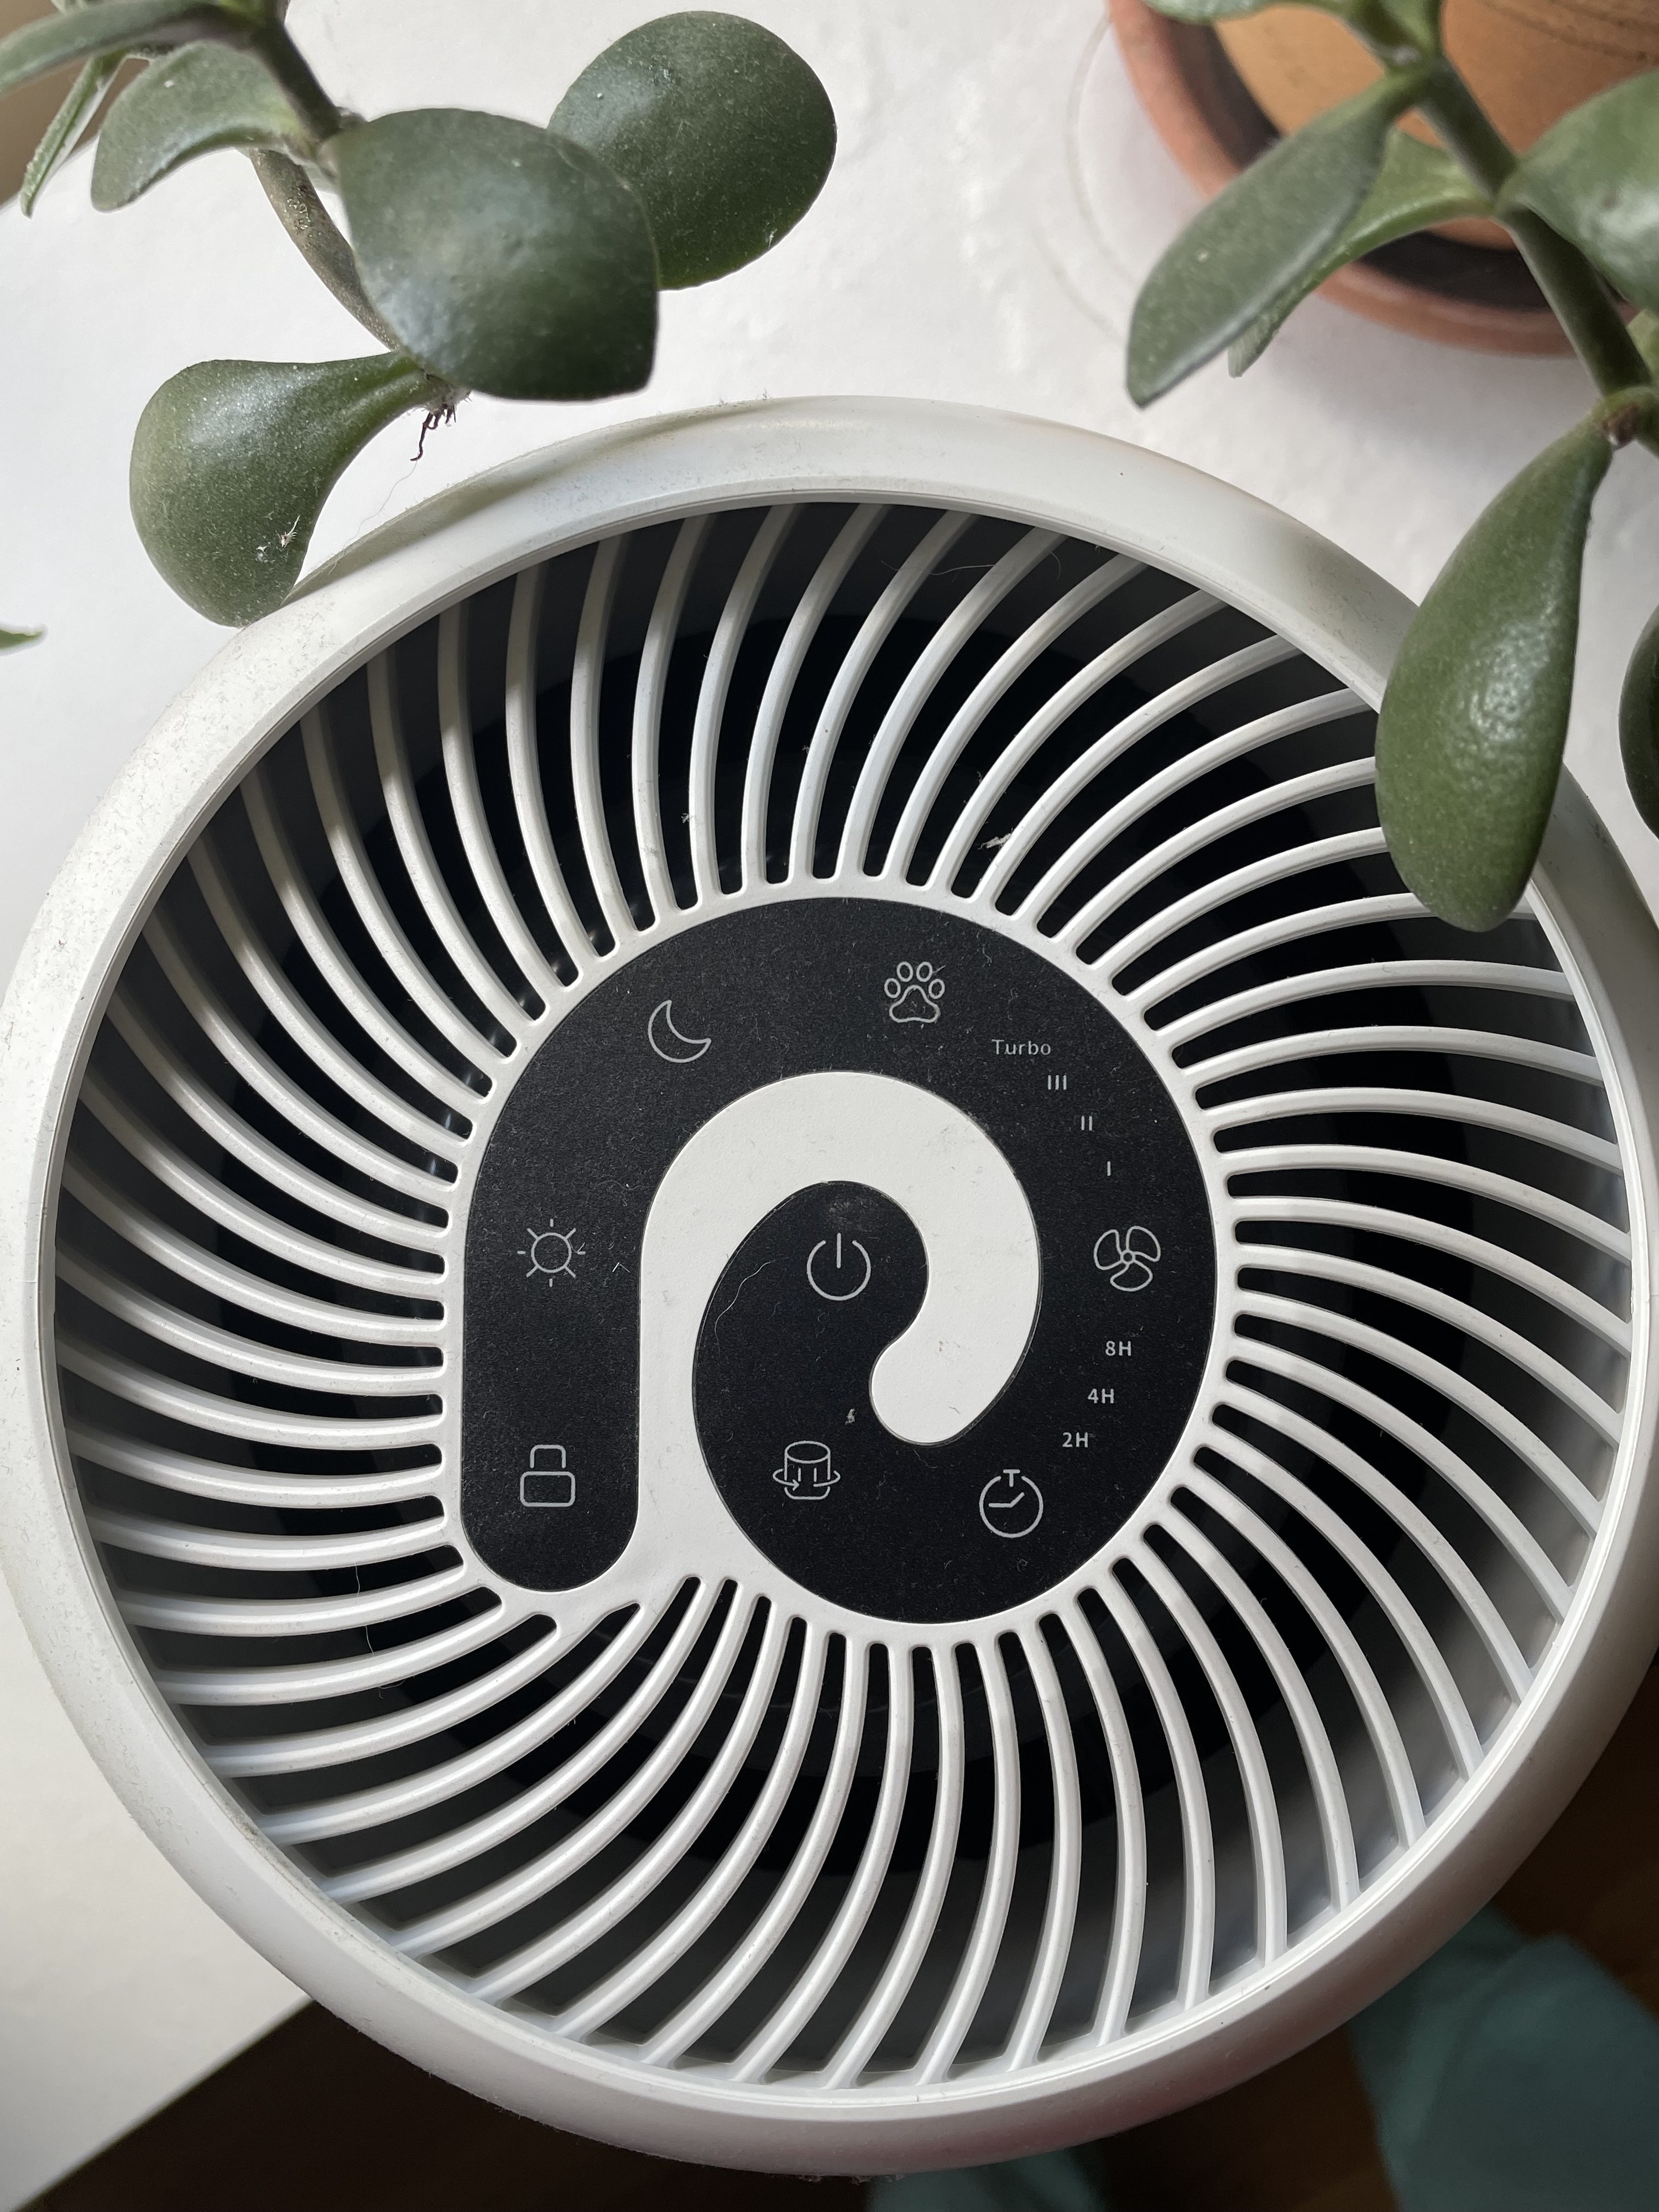 the top of the air purifier, showing all of its settings